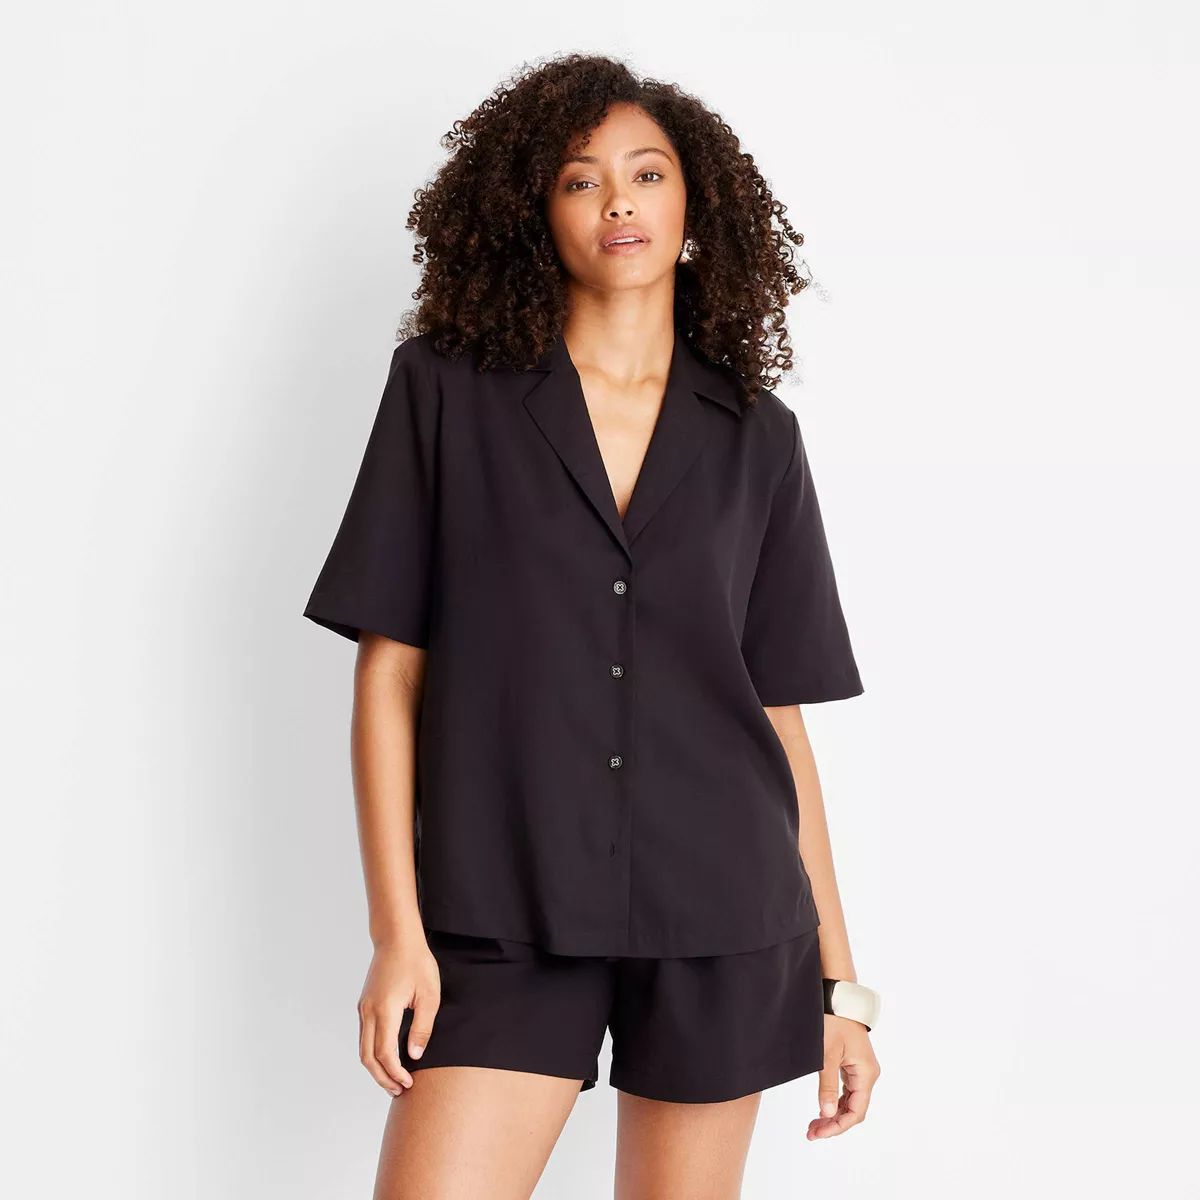 Women's Short Sleeve Resort Shirt - Future Collective™ with Jenee Naylor | Target